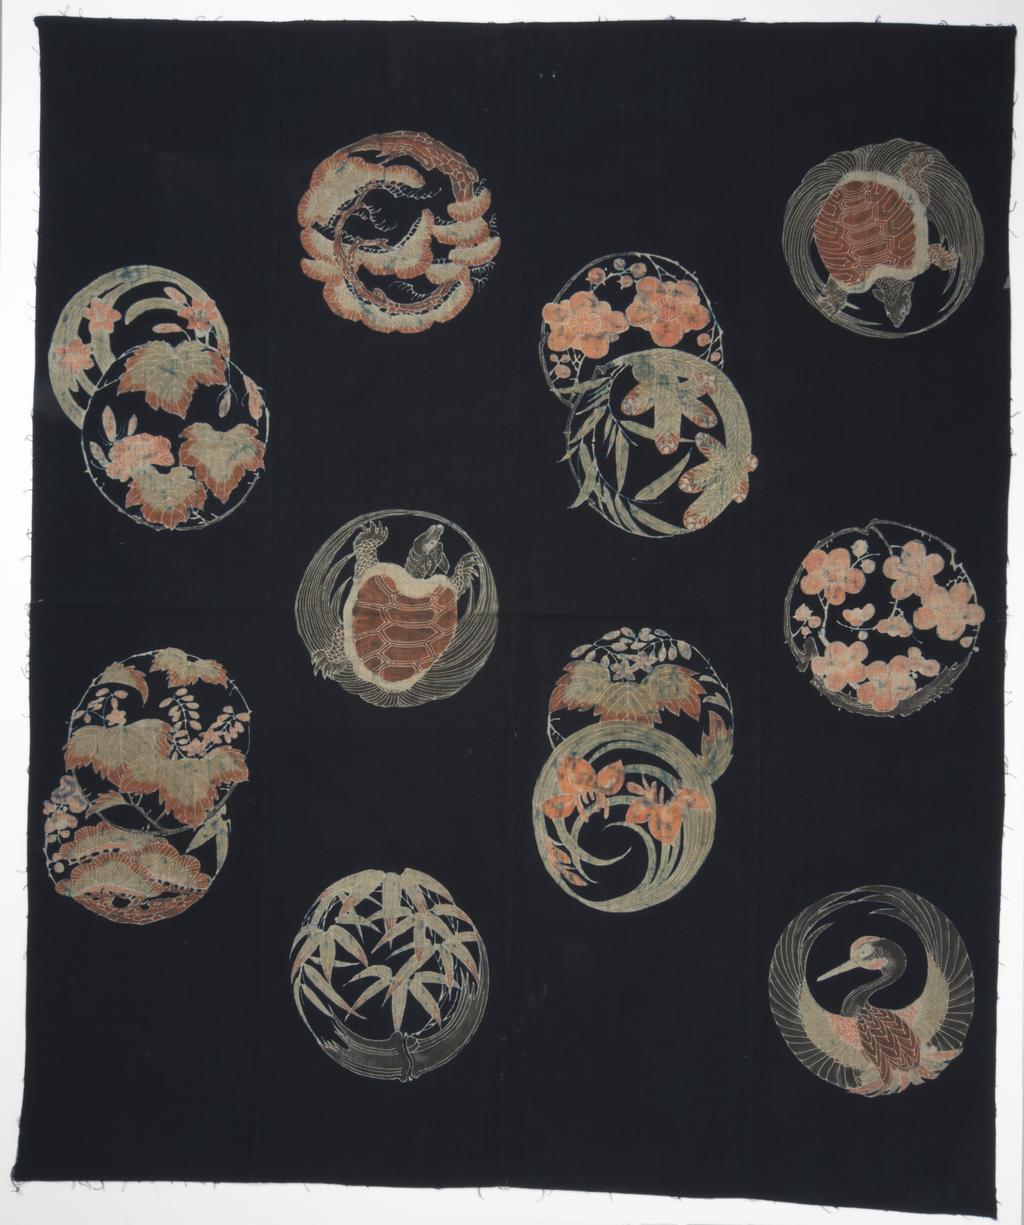 An image of Textiles. Four joined panels. Bedding cover (futon-ji). Unknown maker, Japan, Ryukyu Islands. Motifs of crane, prunus, 10,000 year old tortoise, irises. Resist dyed cotton, dark blue ground; designs painted in greys, beiges and pinks. Length, whole, 155 cm, width, whole, 129 cm, circa 1800-circa 1899.